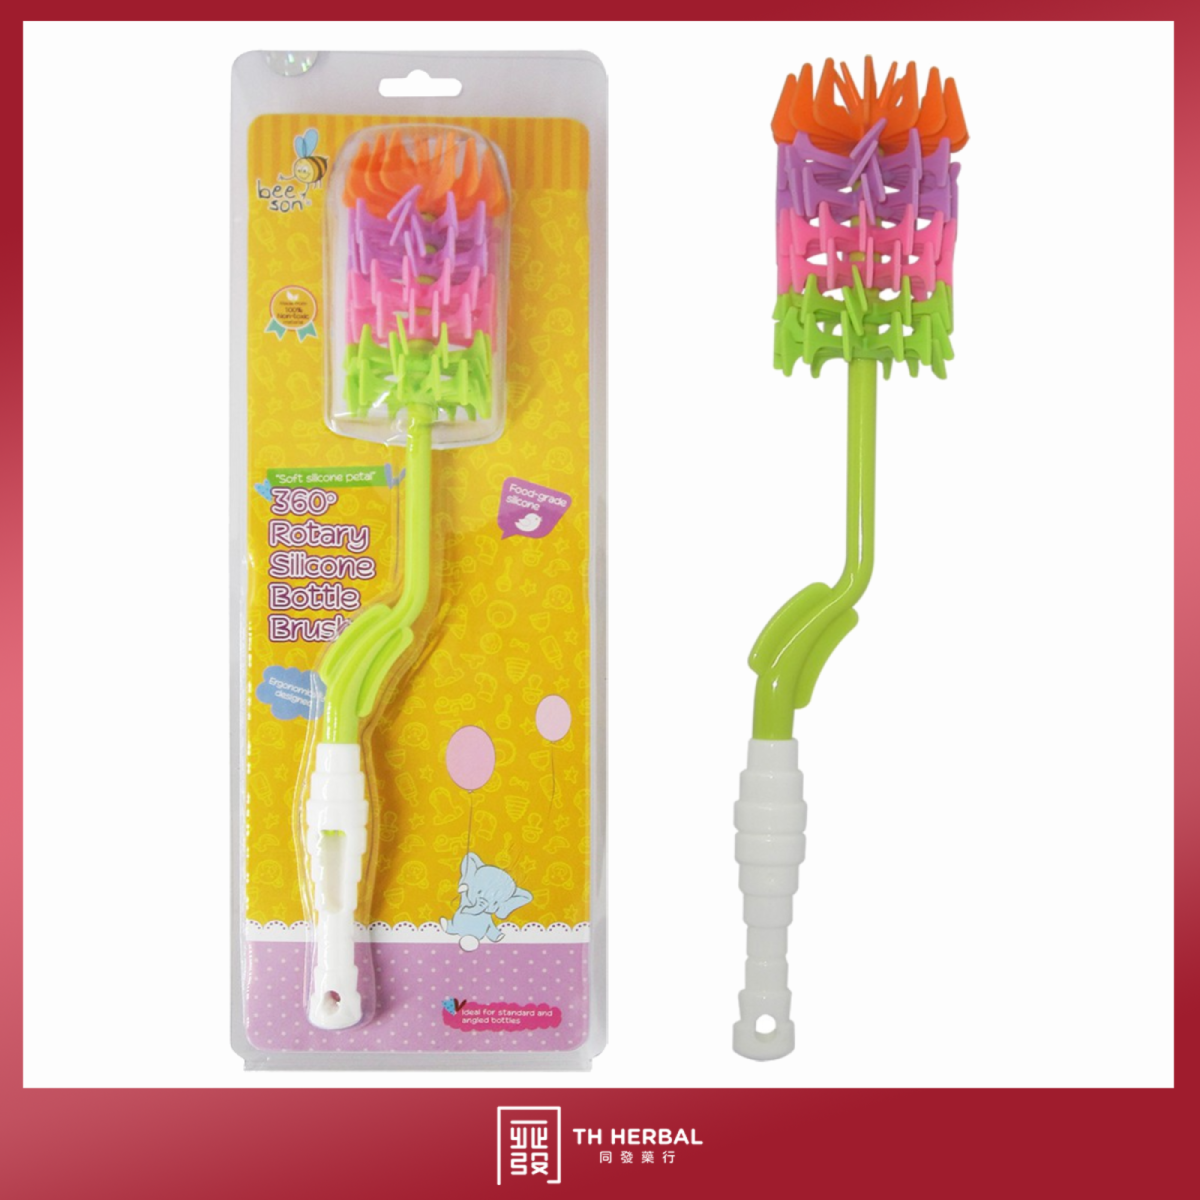 Beeson 360 Rotary Silicone Bottle Brush (1).png